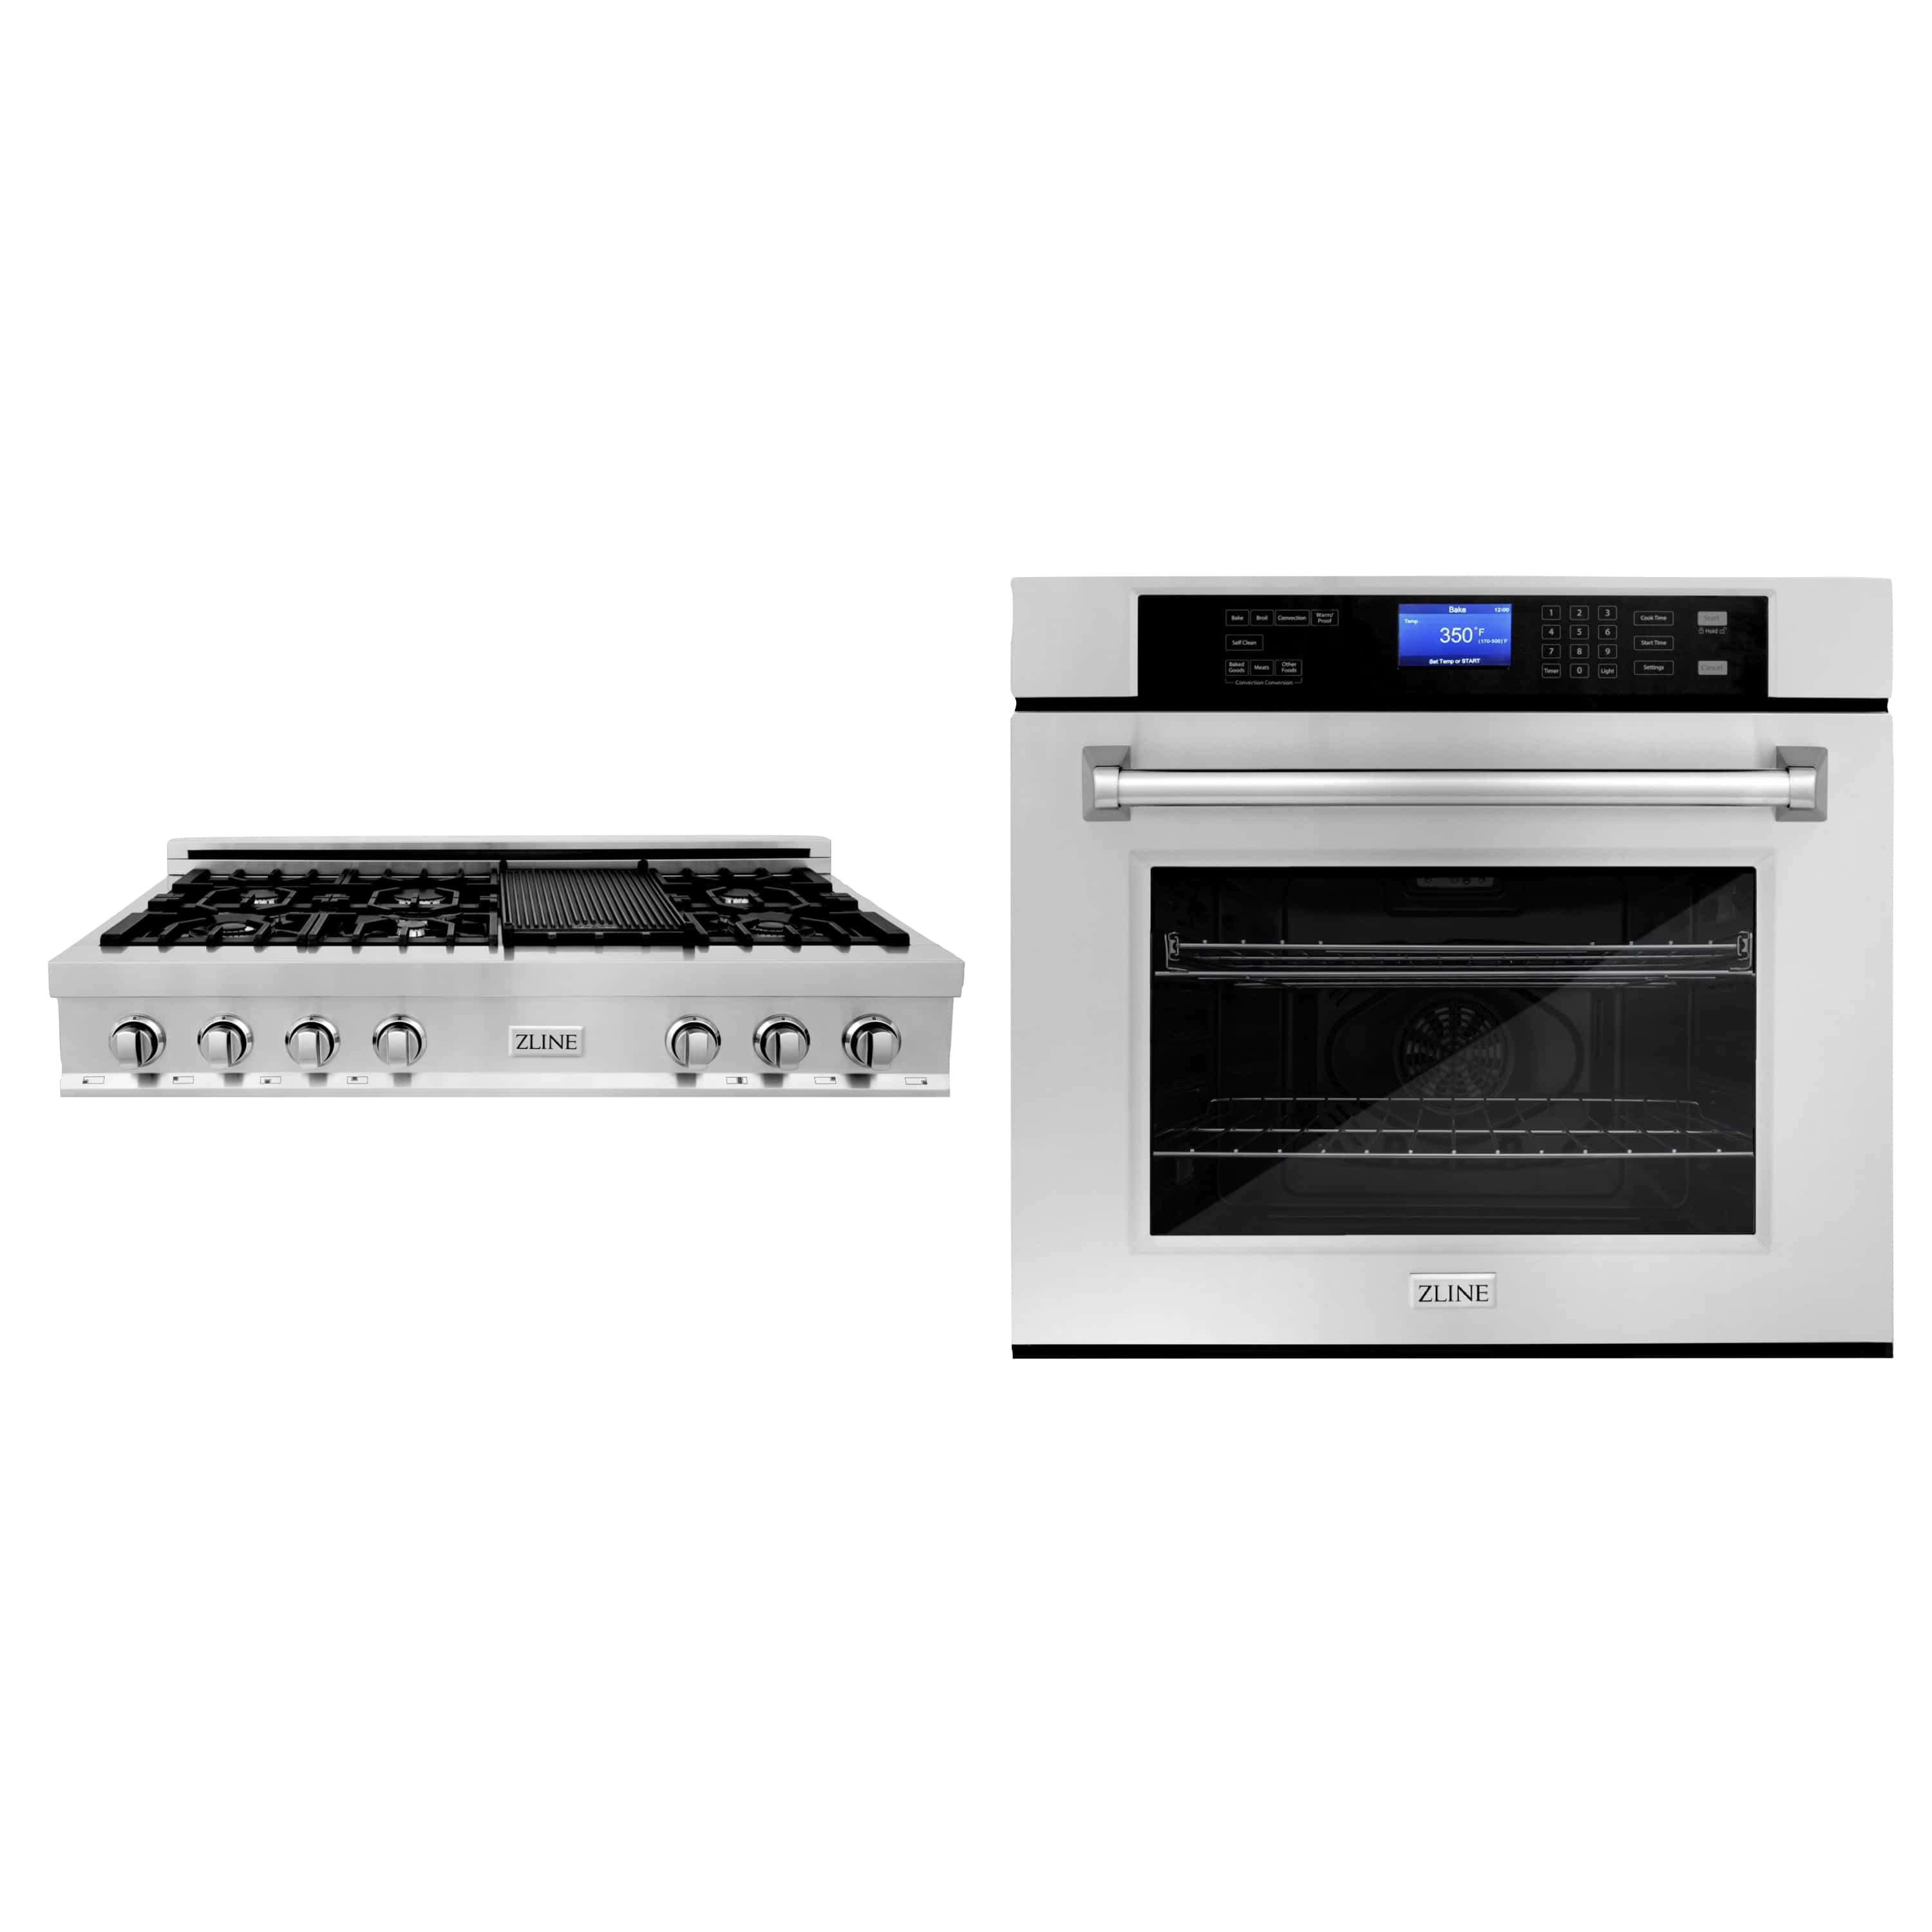 ZLINE 2-Piece Appliance Package - 48-inch Rangetop and 30-inch Wall Oven in Stainless Steel (2KP-RTAWS48)